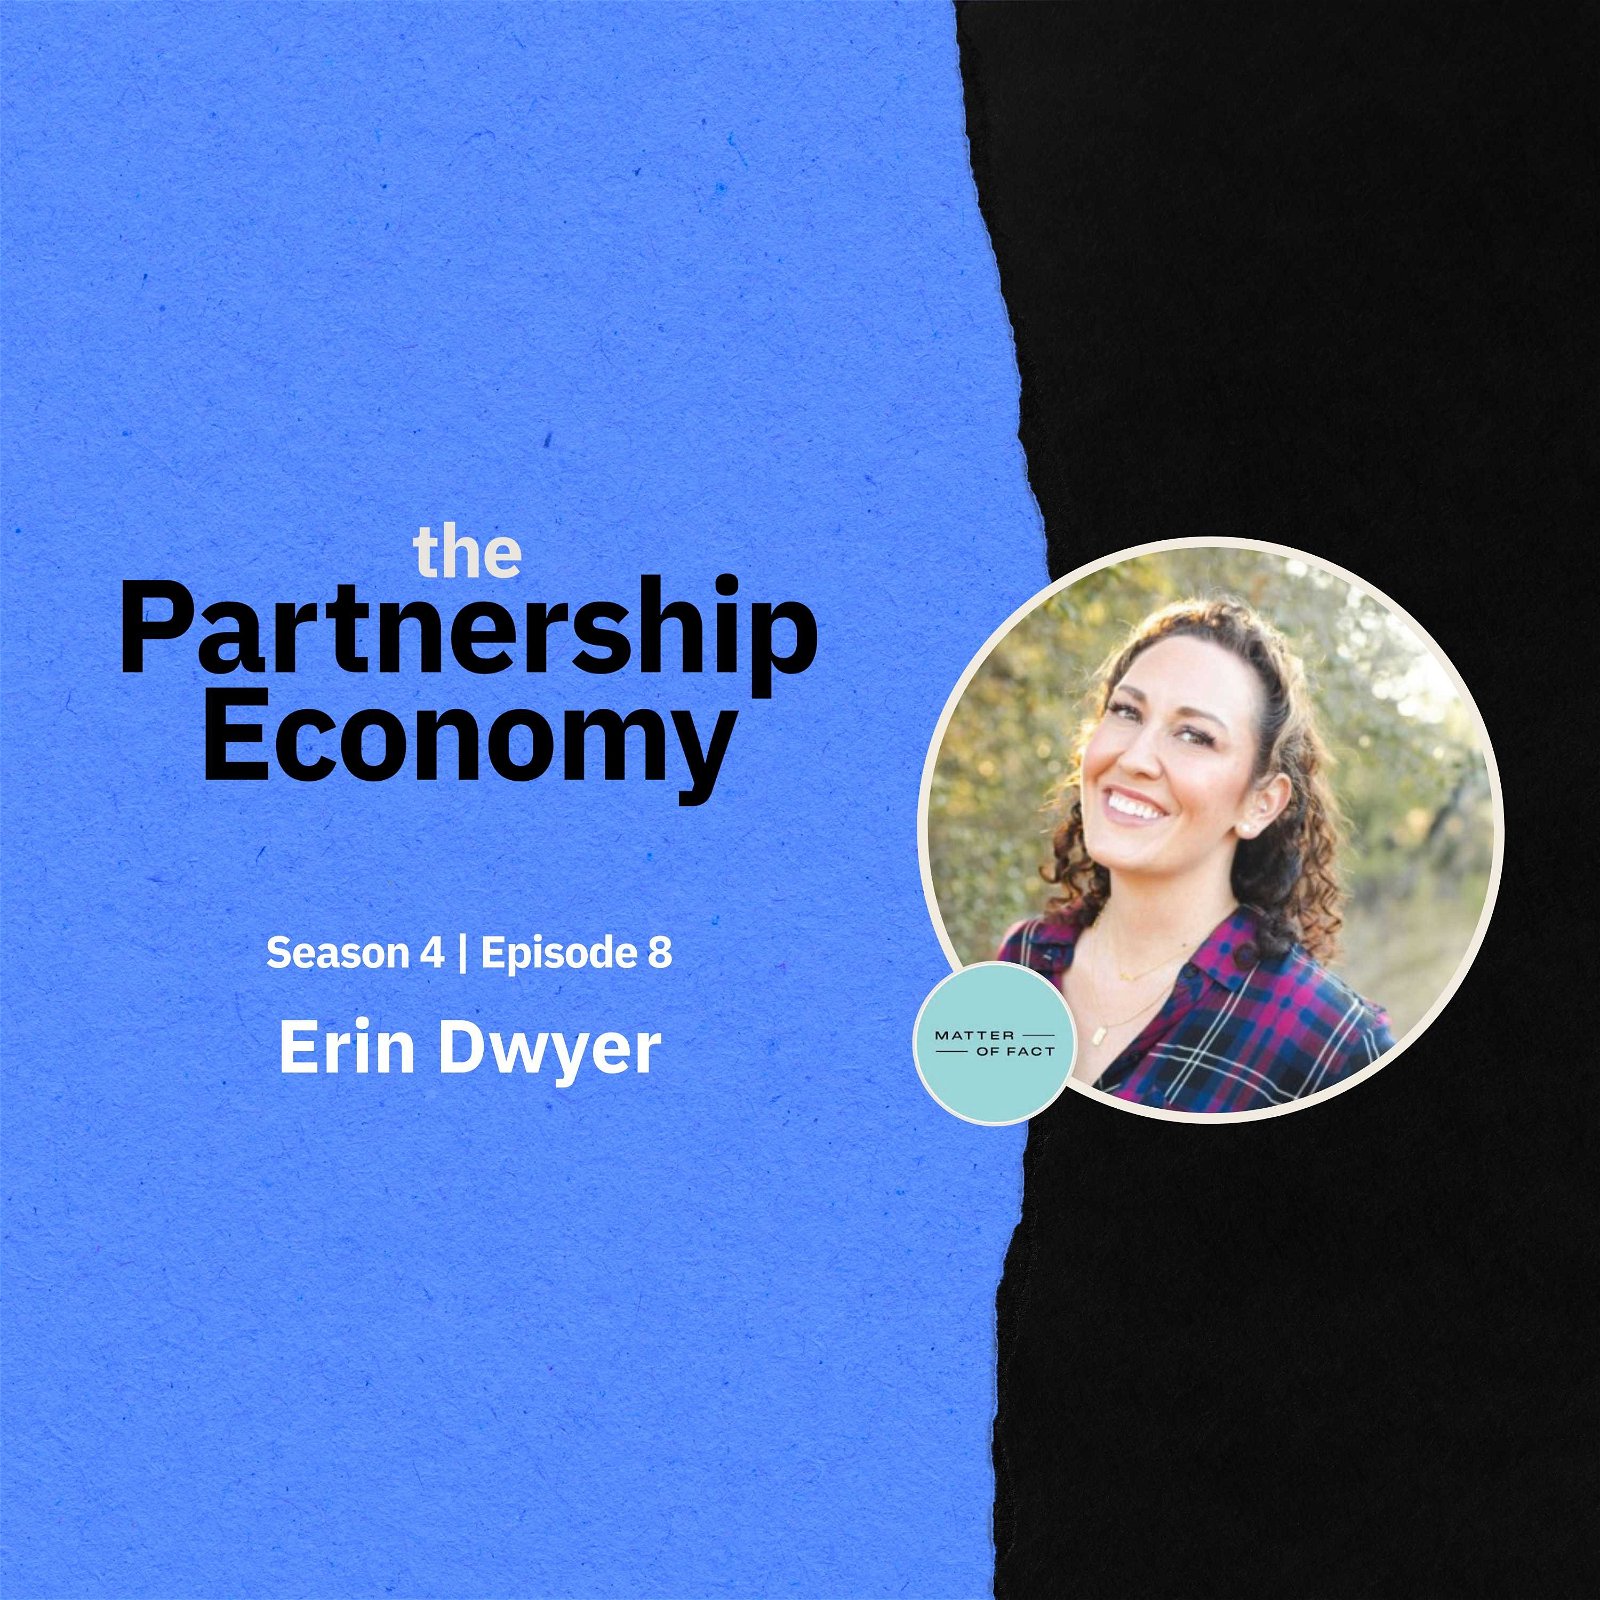 Episode cover art for Erin Dwyer, CMO of Matter of Fact, on the challenges of customer acquisition and building a beauty brand in a saturated space